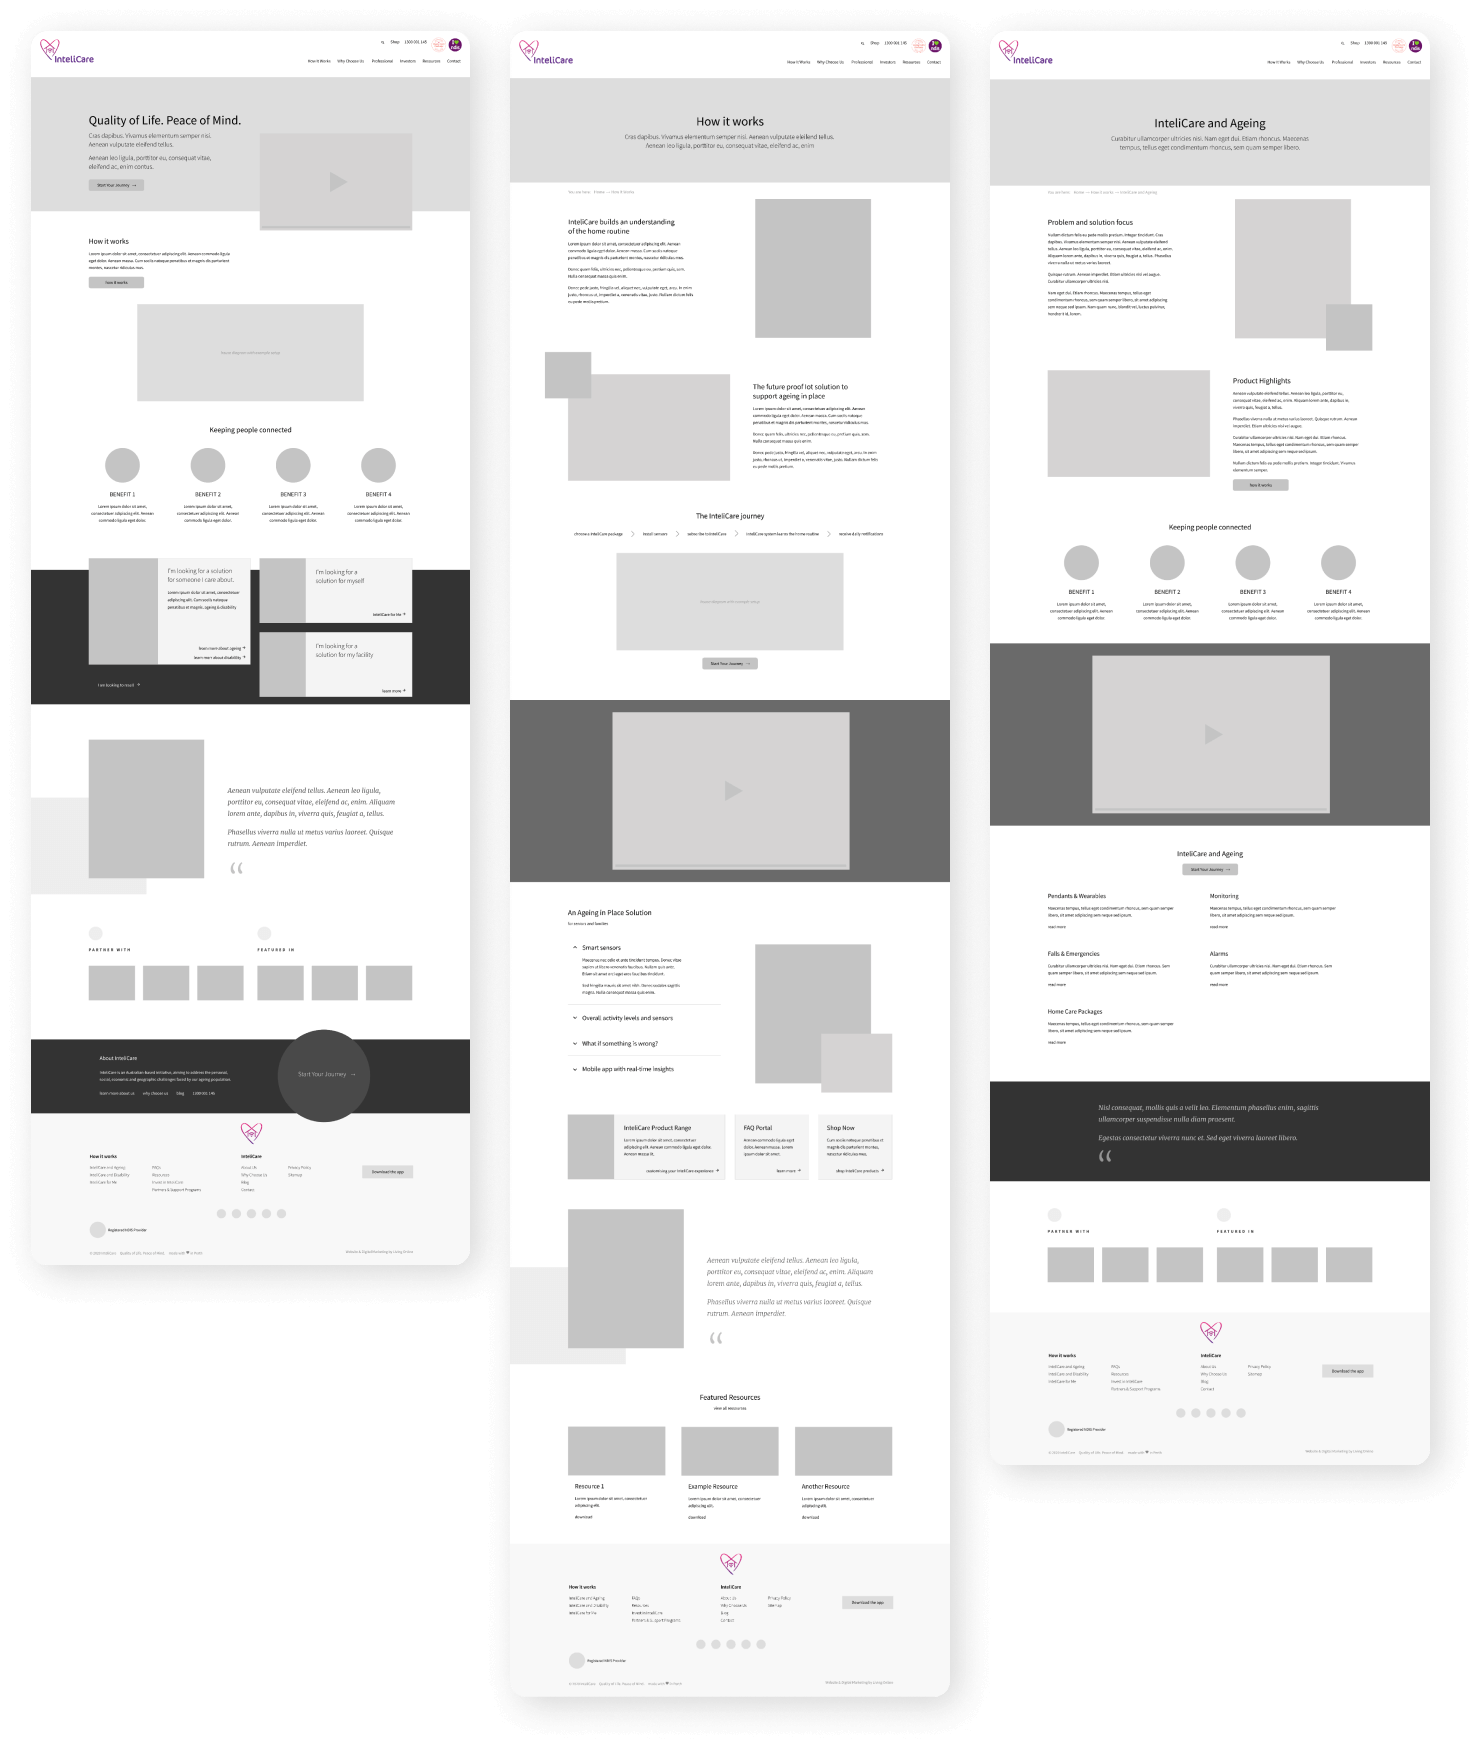 Wireframes for InteliCare's website designs